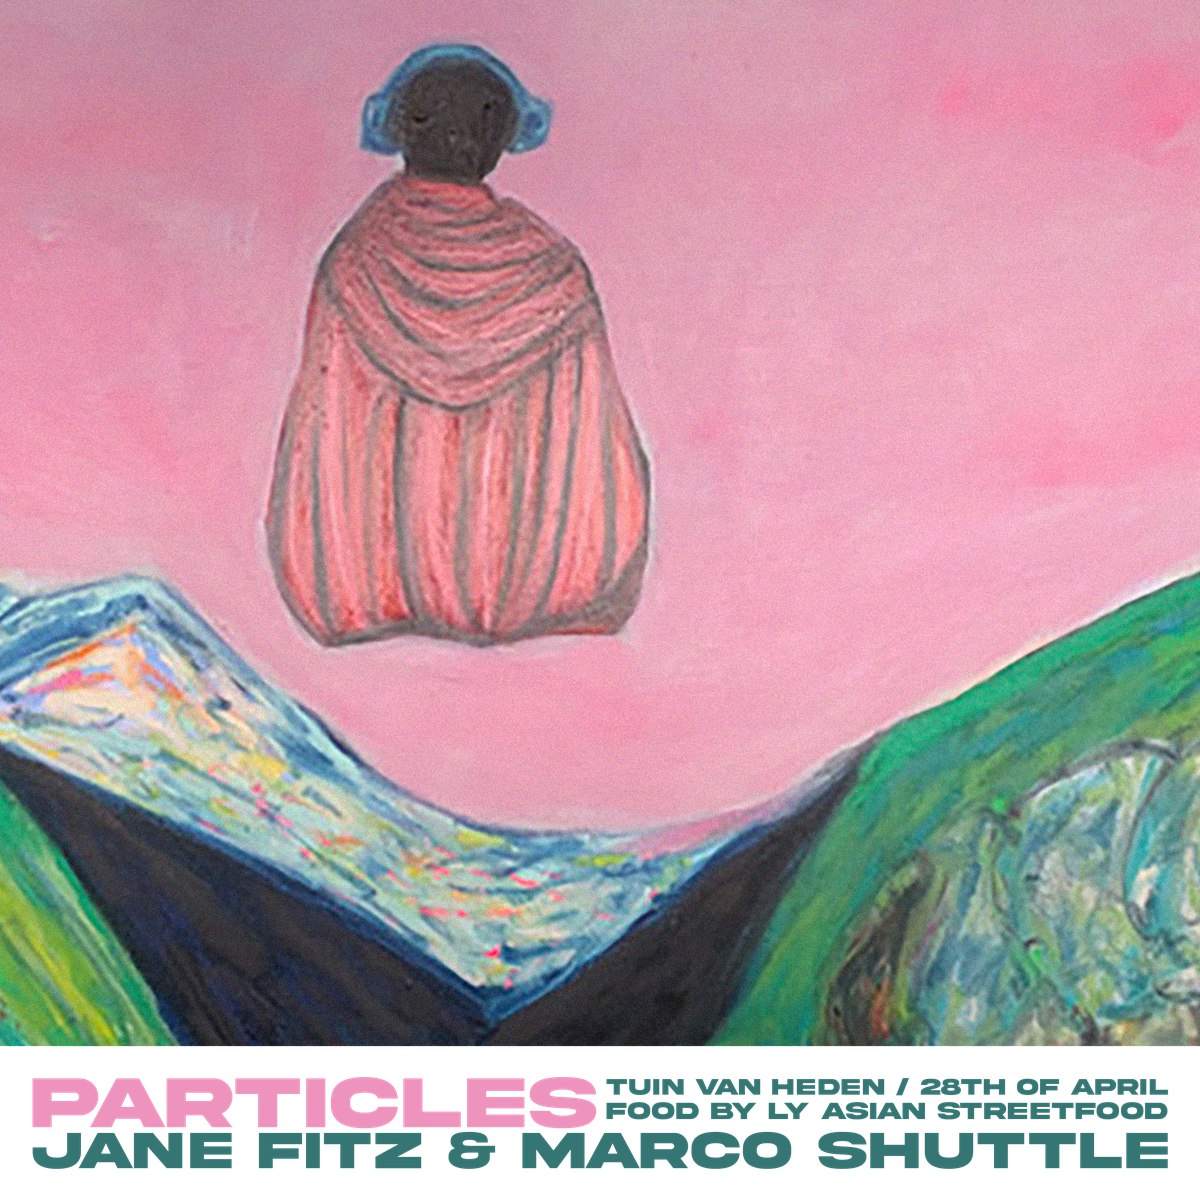 Particles x Tuin van Heden: Jane Fitz & Marco Shuttle All Day Long - フライヤー表